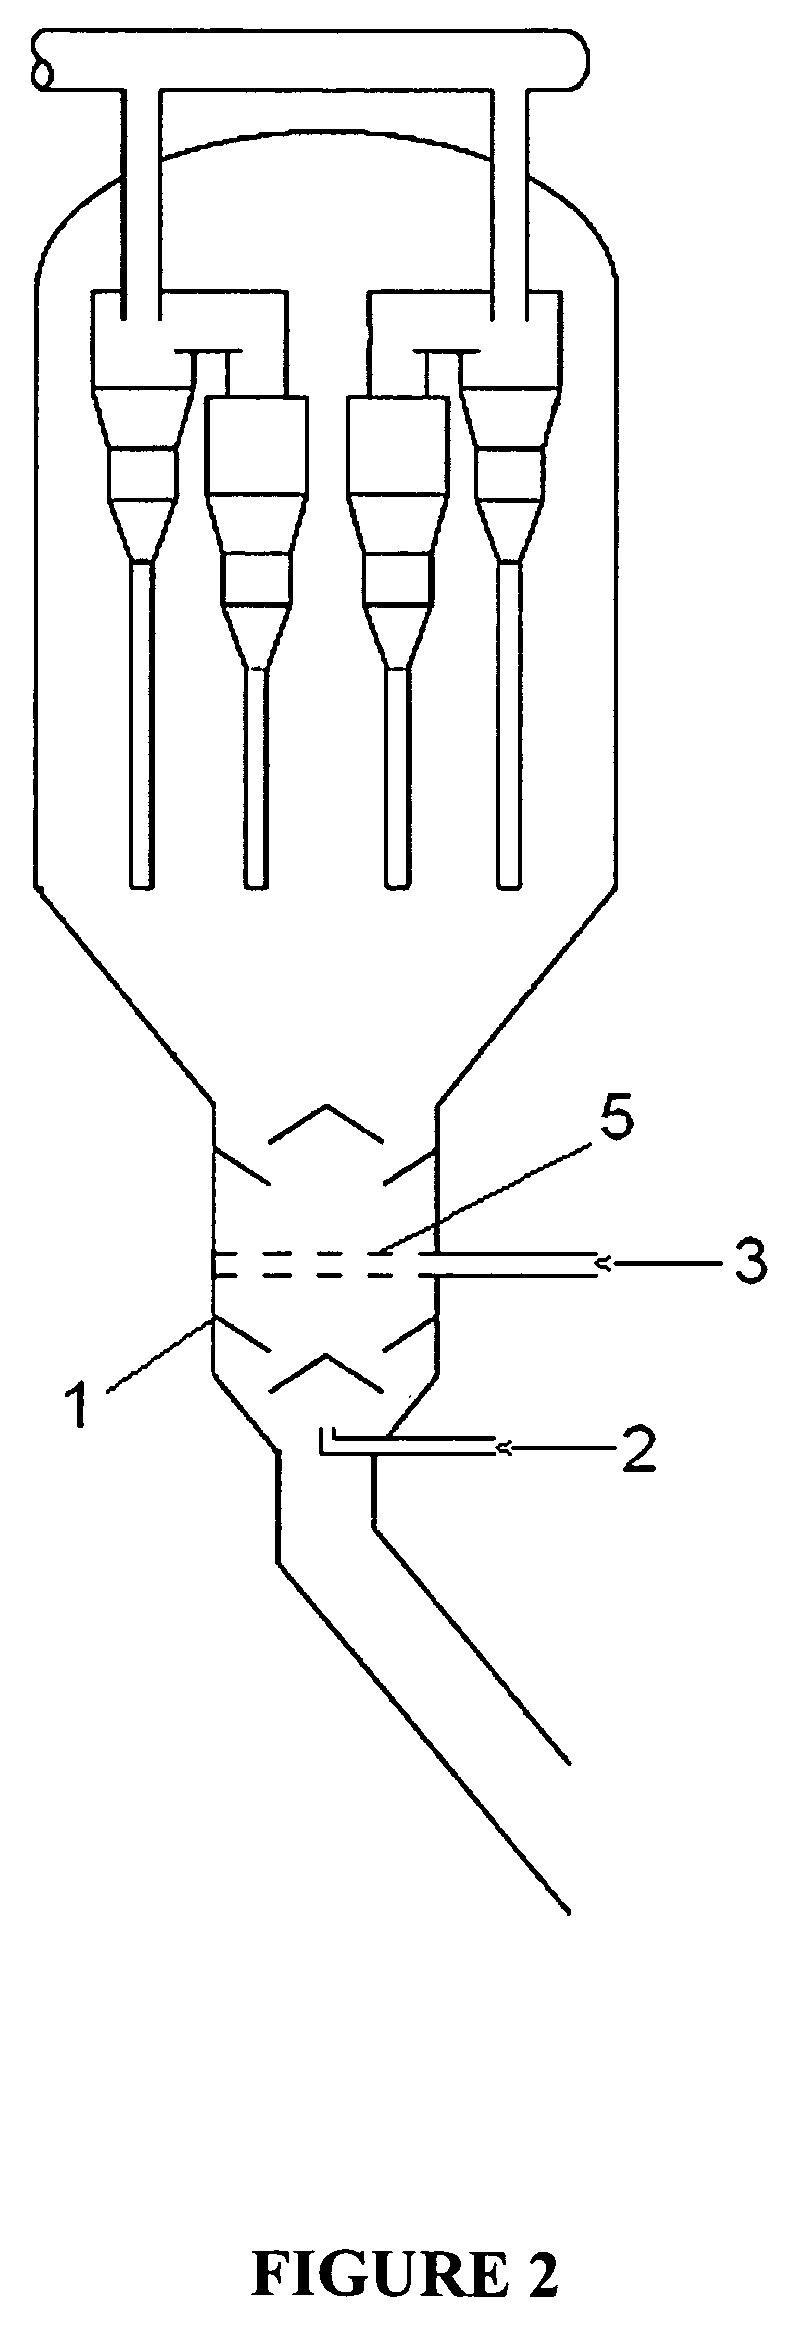 Process and device to optimize the yield of fluid catalytic cracking products